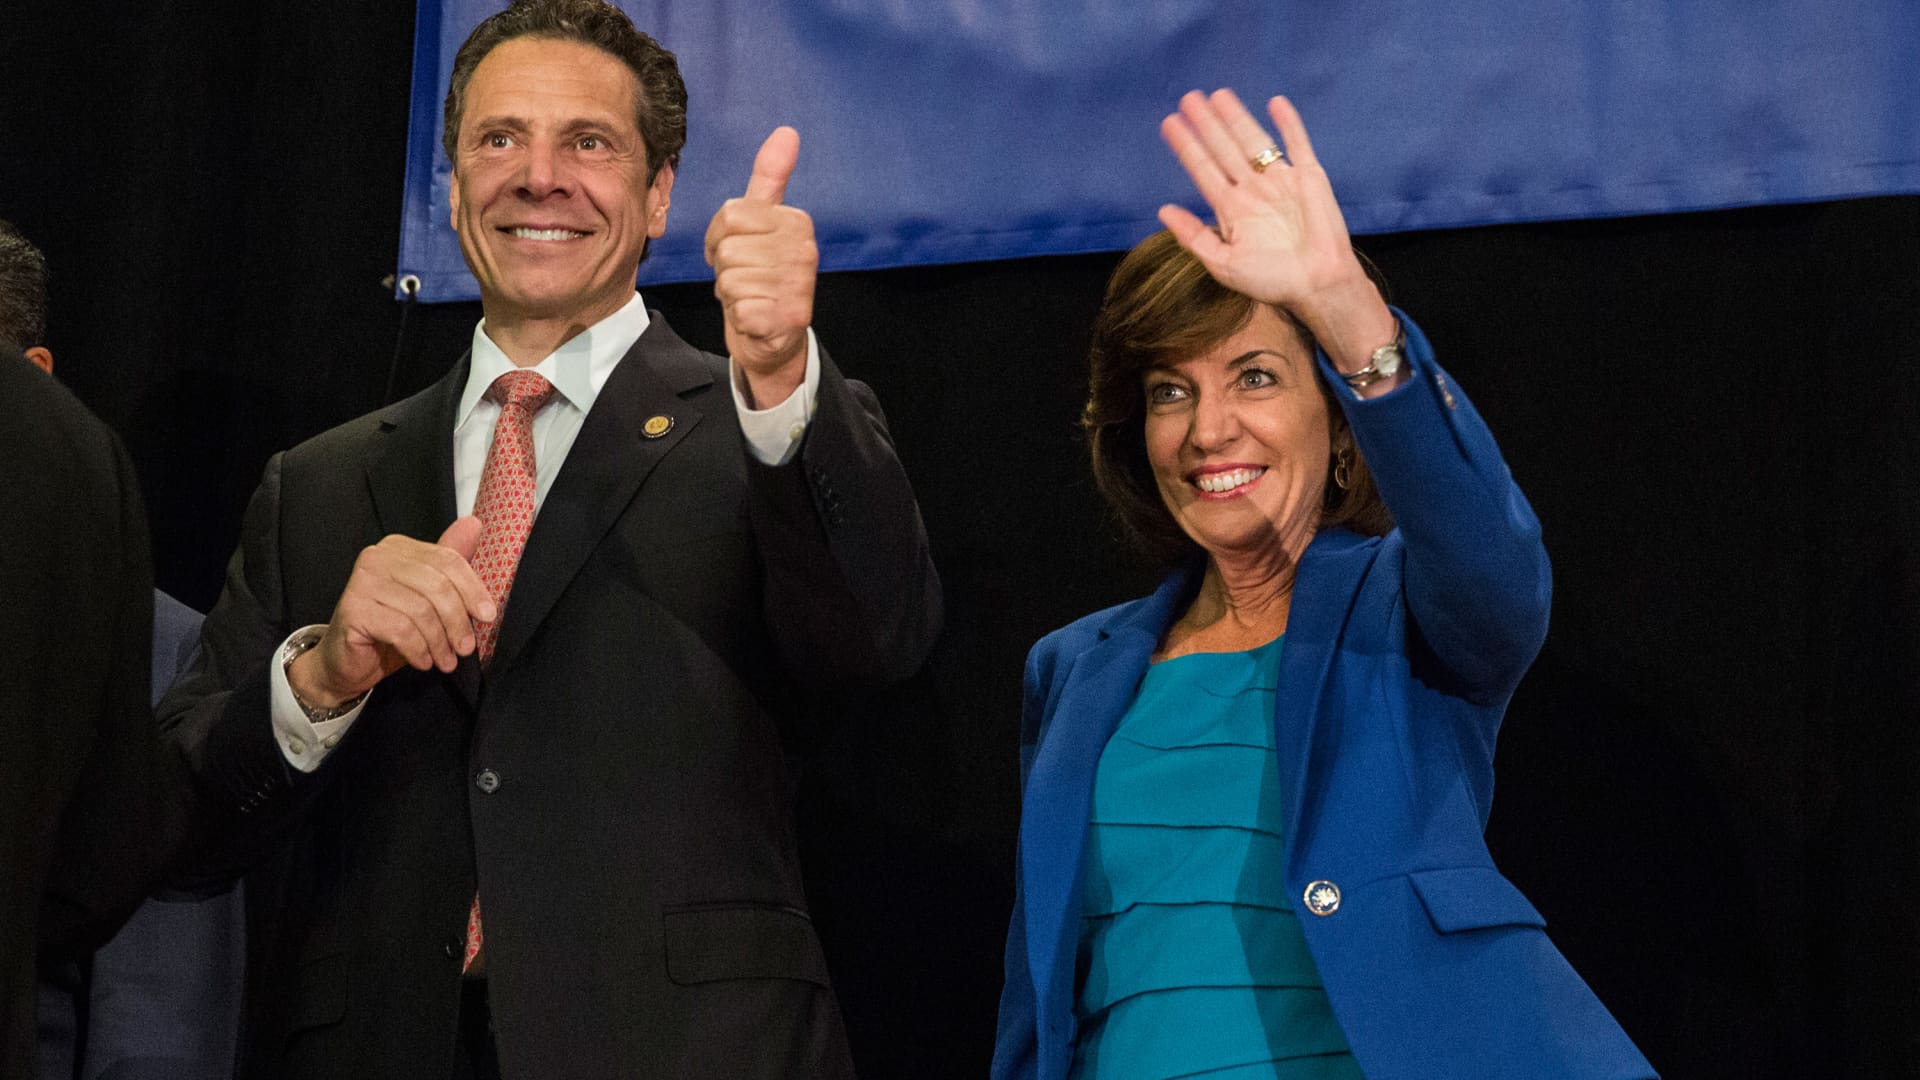 Ex-New York Gov. Andrew Cuomo considers running against Kathy Hochul despite opposition from his own party